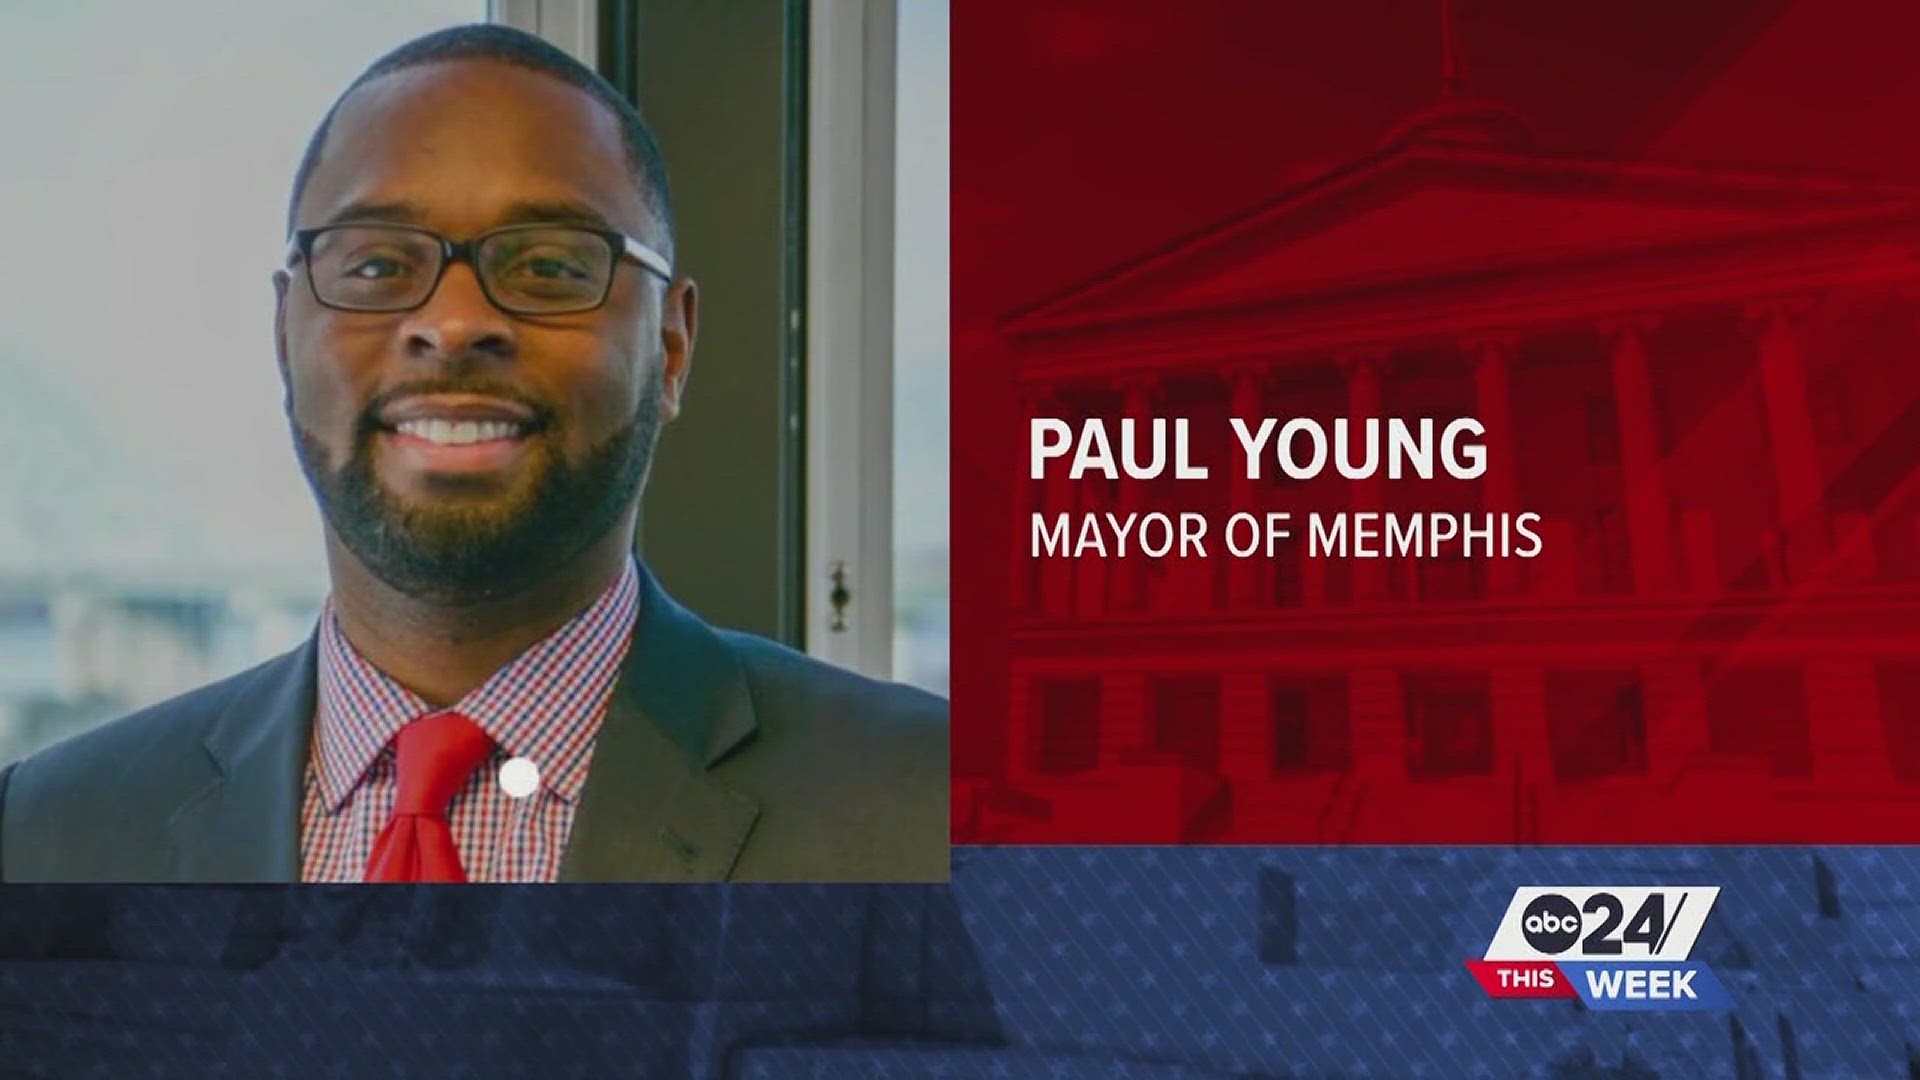 From giving an "I" for "incomplete" to saying he has elevated the city, the ABC24 This Week panel shares their opinions on Paul Young's first 100 days in office.